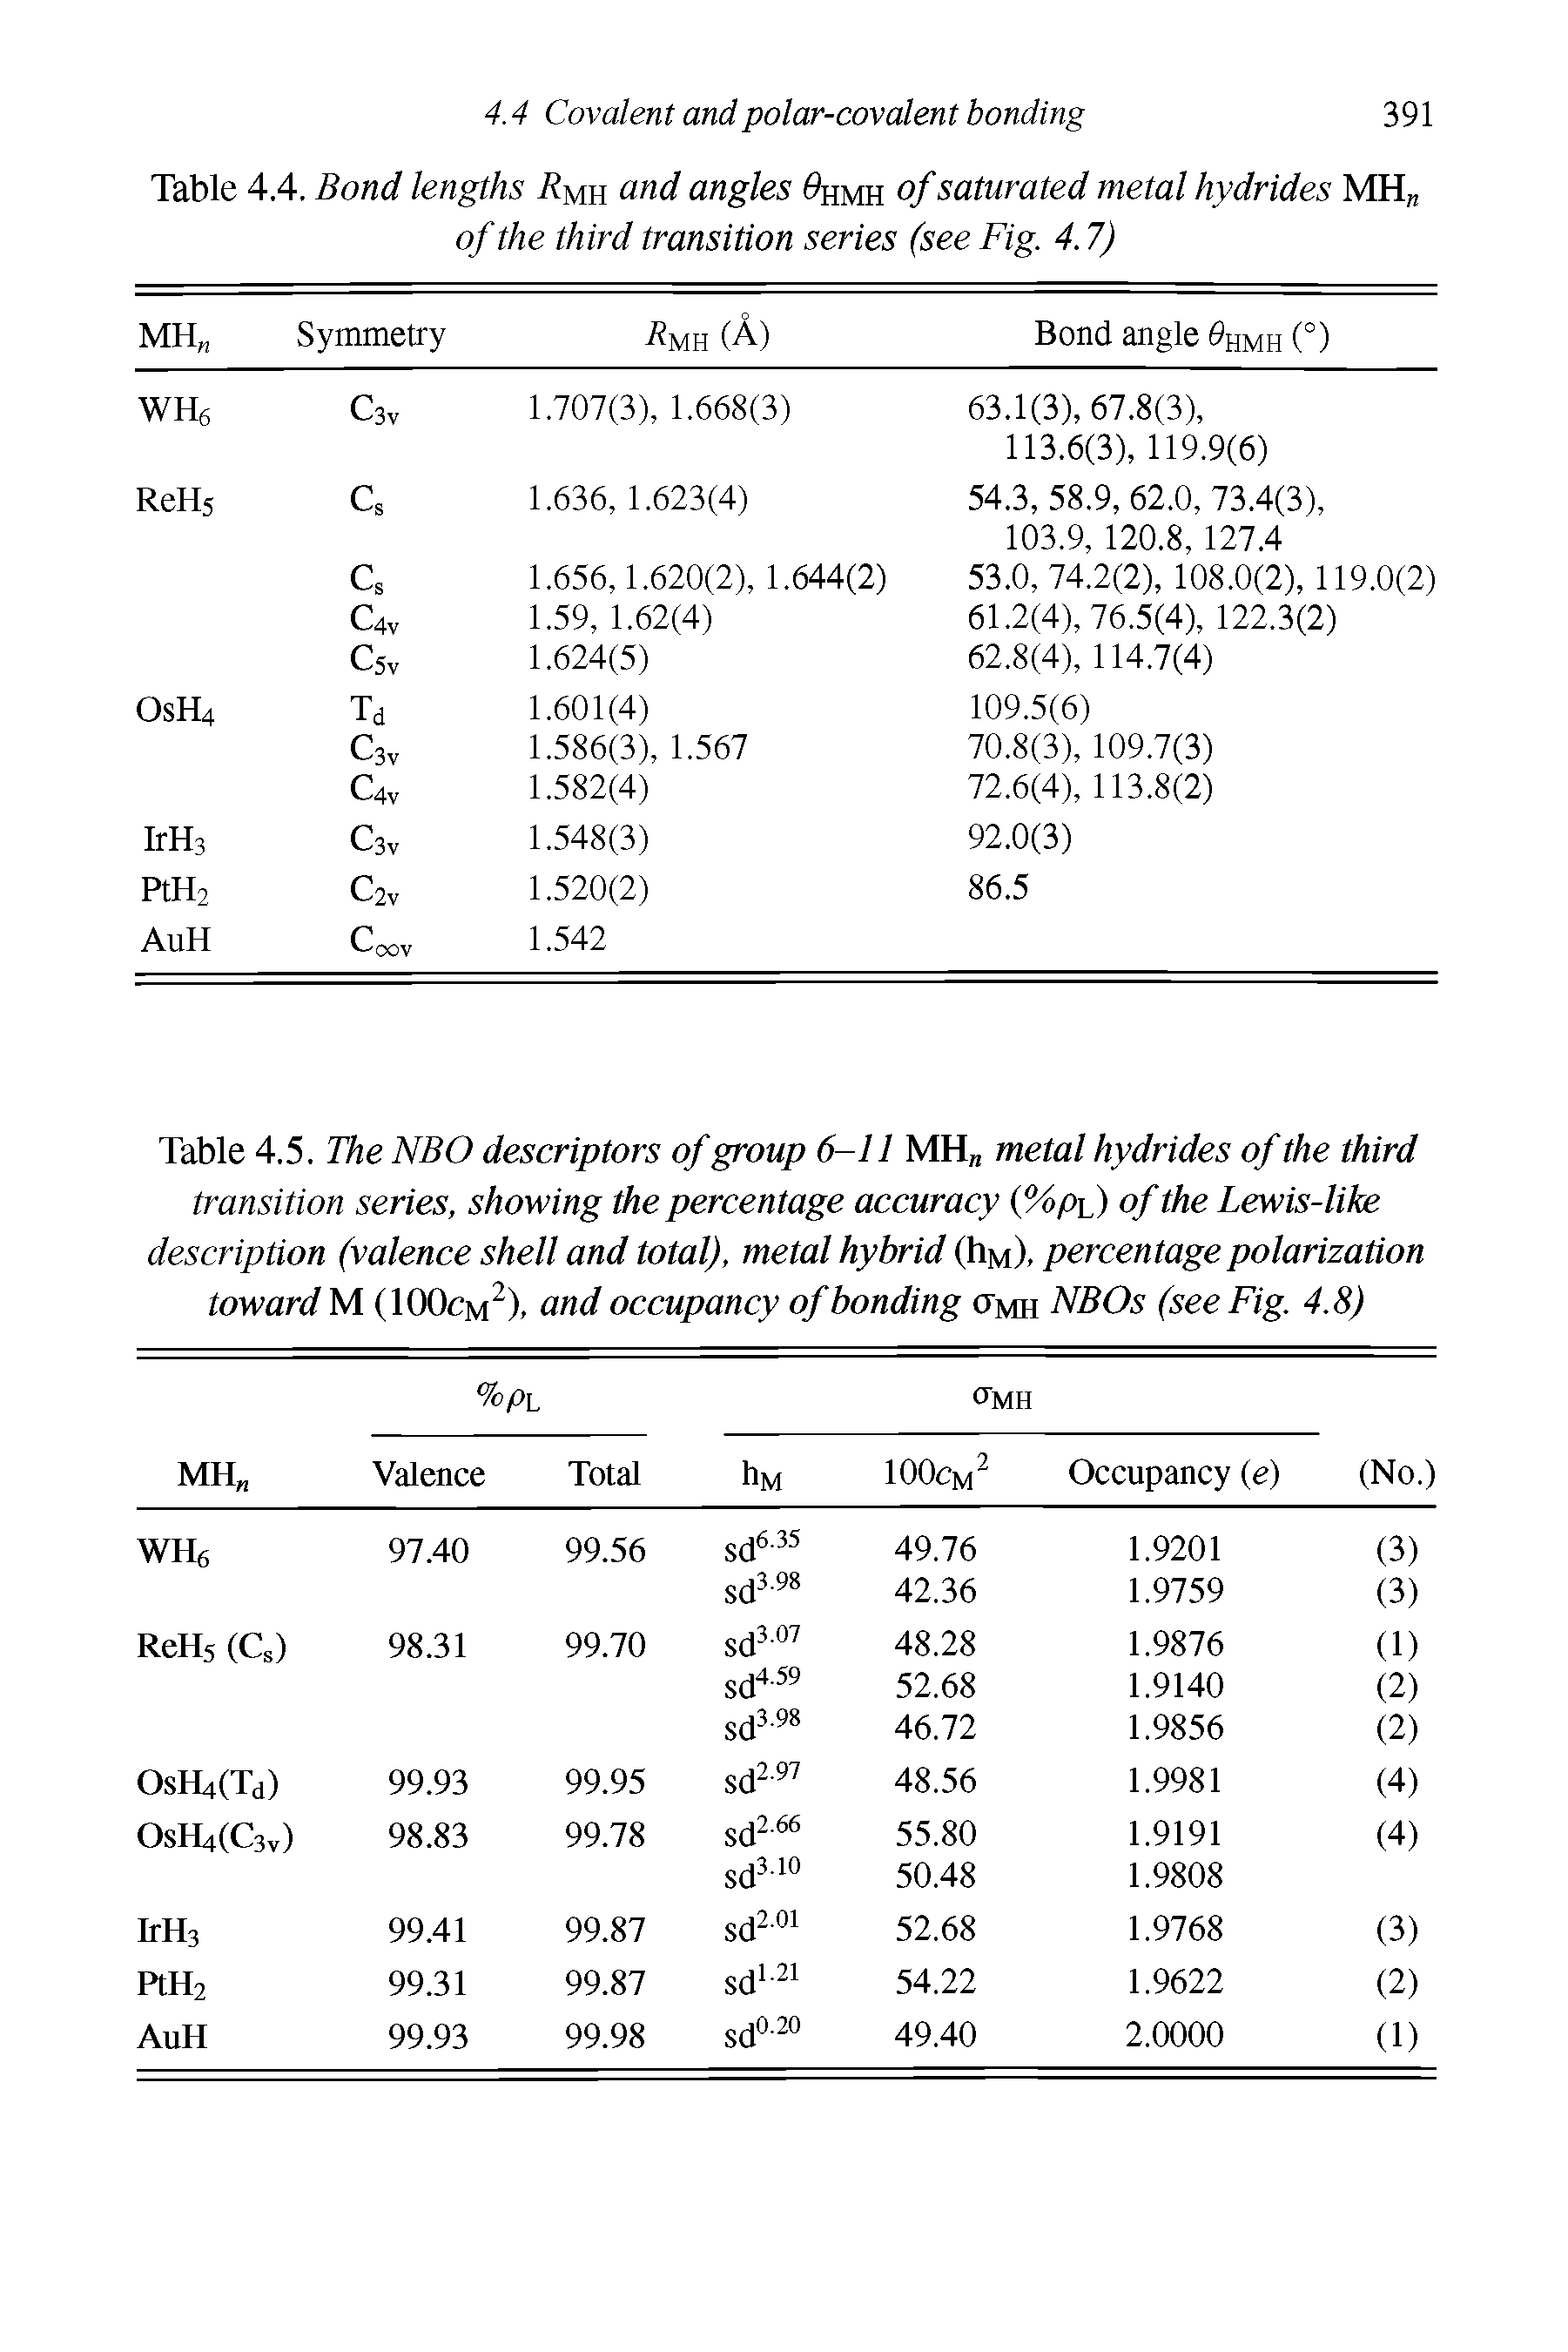 Table 4.5. The NBO descriptors of group 6-11 MH metal hydrides of the third transition series, showing the percentage accuracy (%fy) of the Lewis-like description (valence shell and total), metal hybrid (Iim), percentage polarization toward M (100cm2), and occupancy of bonding ctmh NBOs (see Fig. 4.8)...